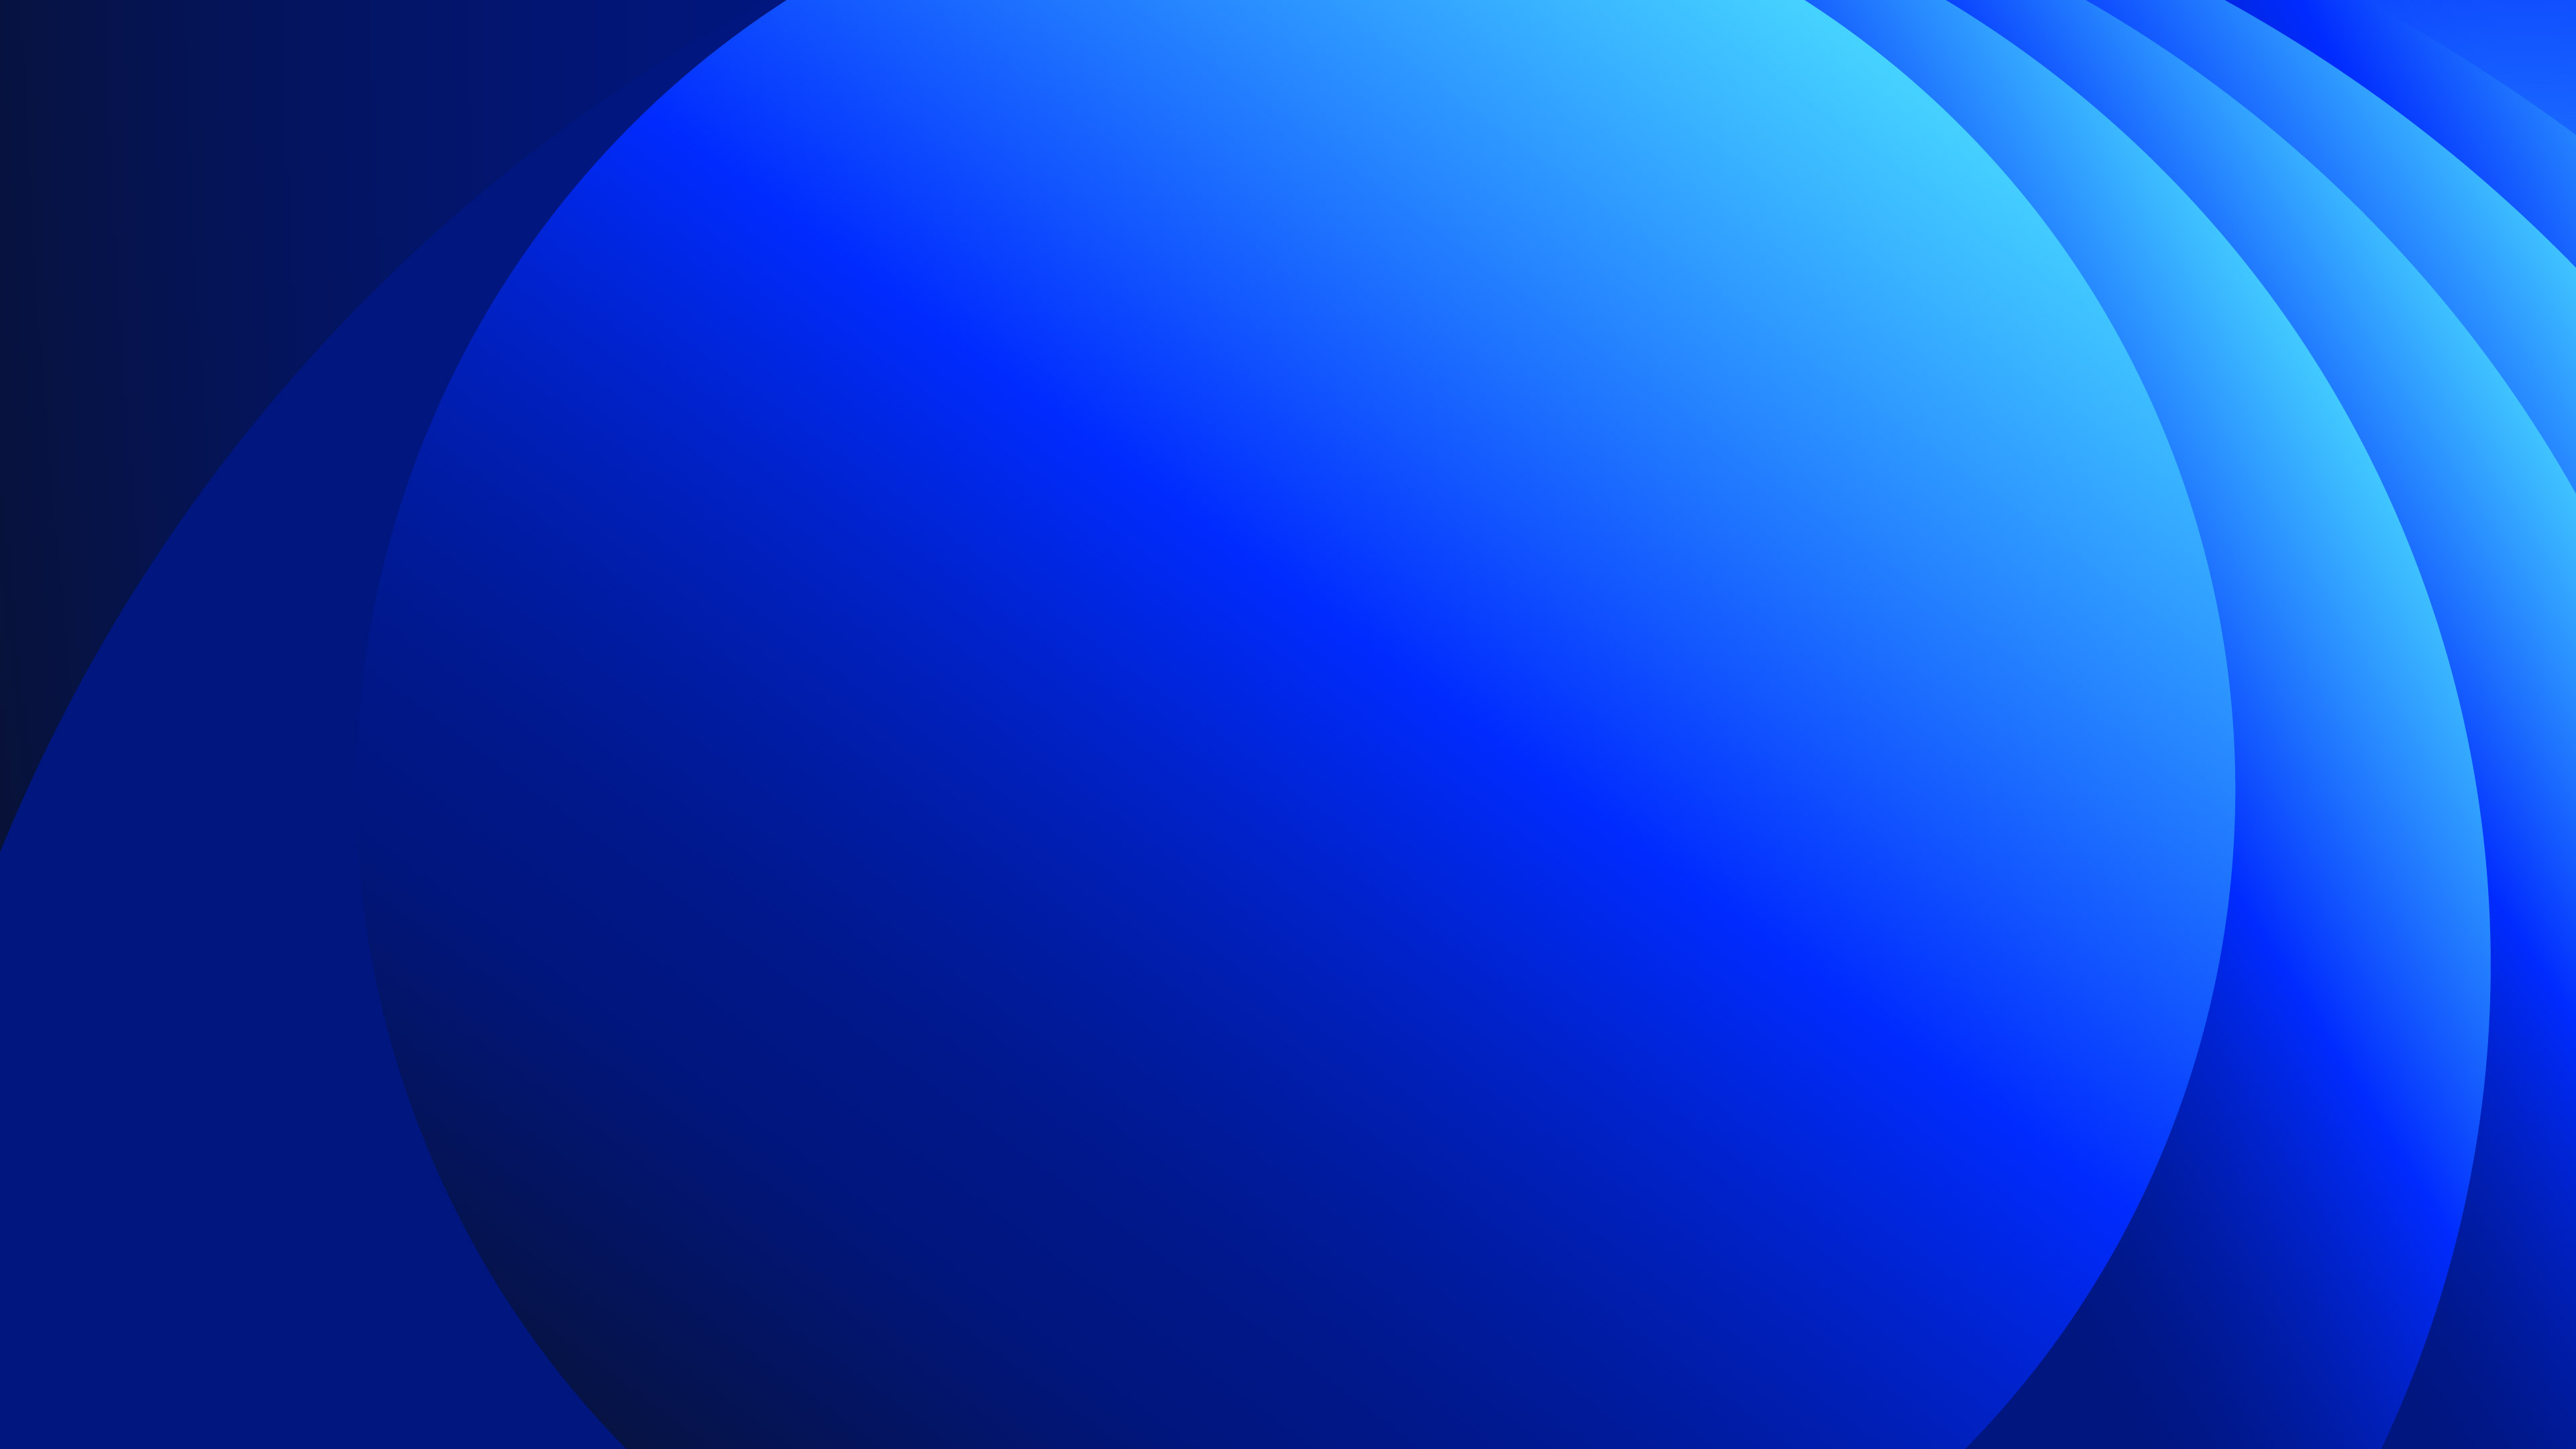 Circular geometric shapes with a striking blue gradient